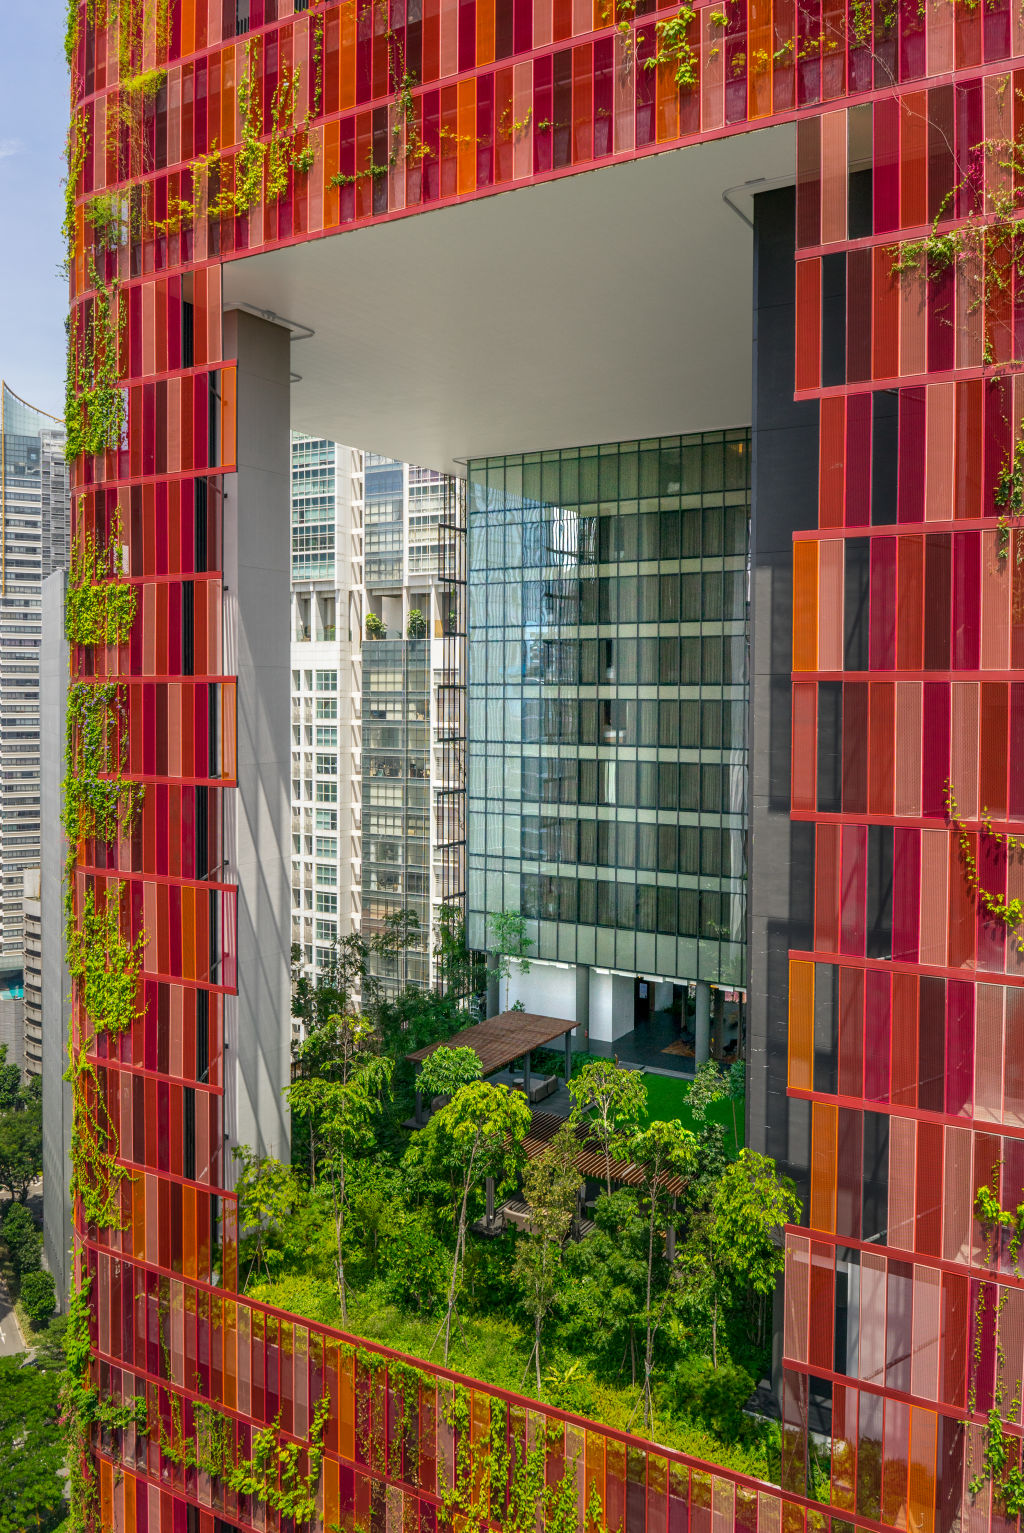 Oasia Hotel Downtown in Singapore, where a focus on greenery was made a priority. Photo: Patrick Bingham-Hall and K. Kopter